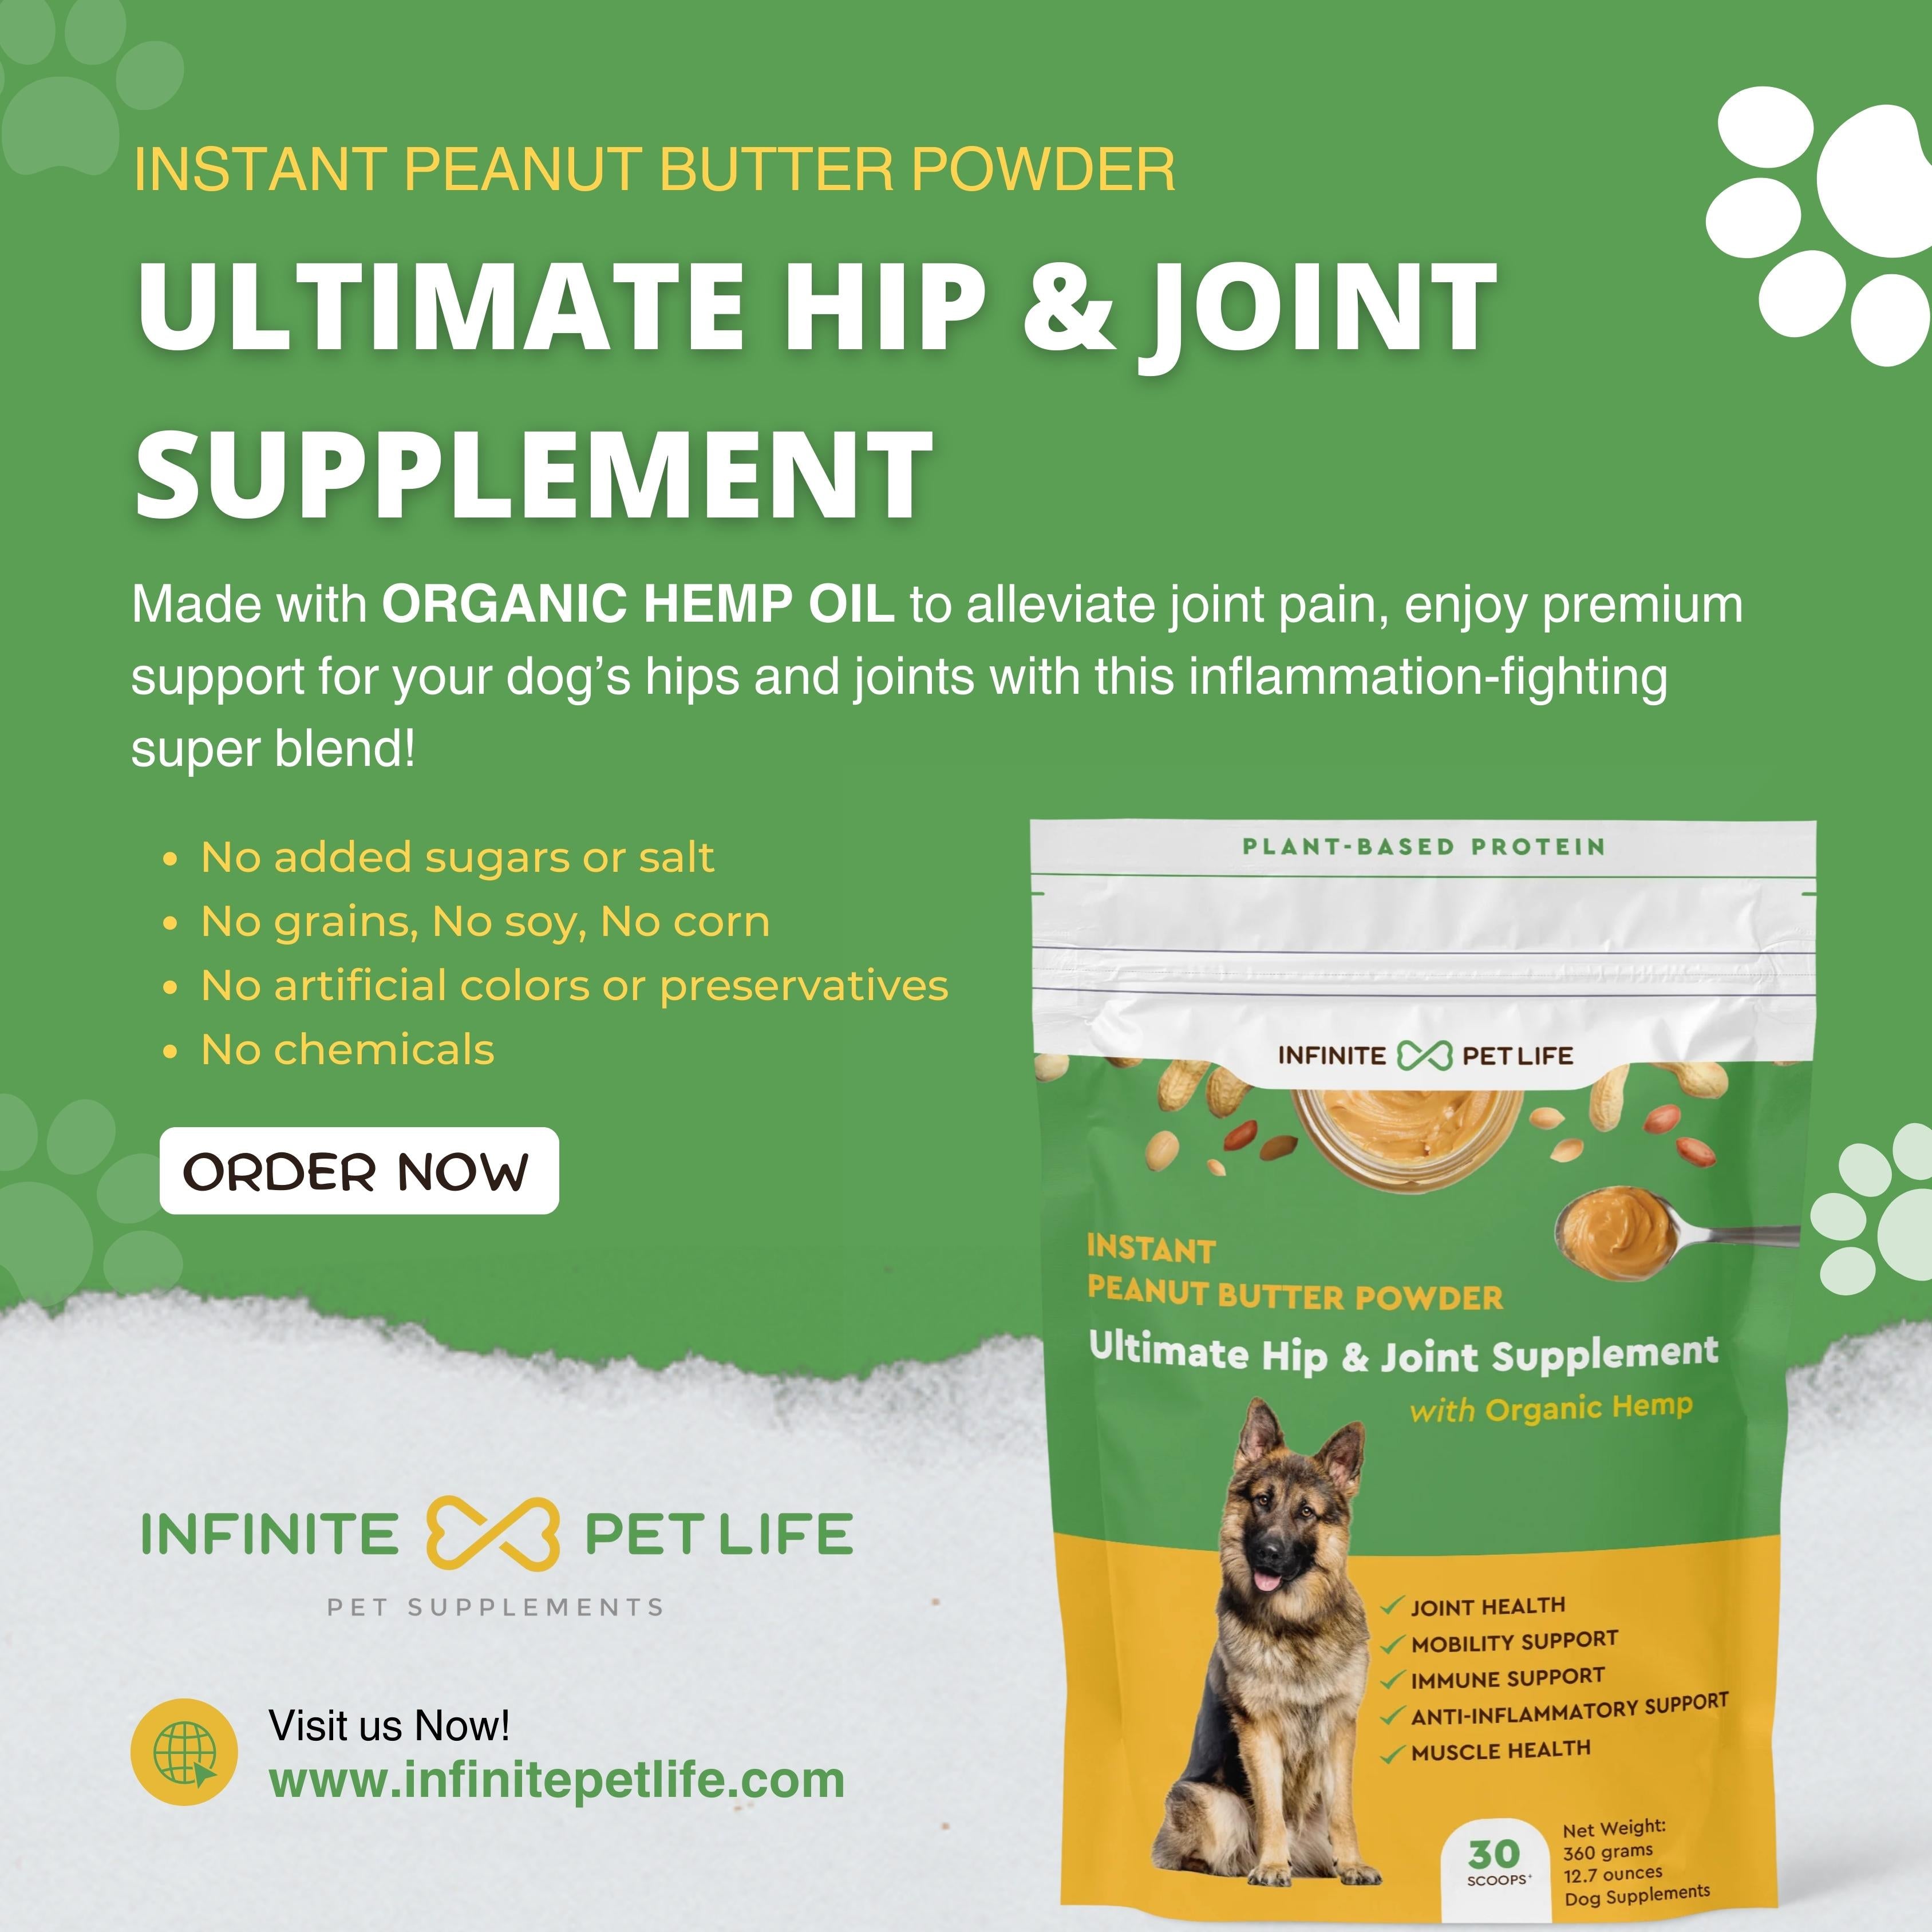 Ultimate Hip & Joint Powder